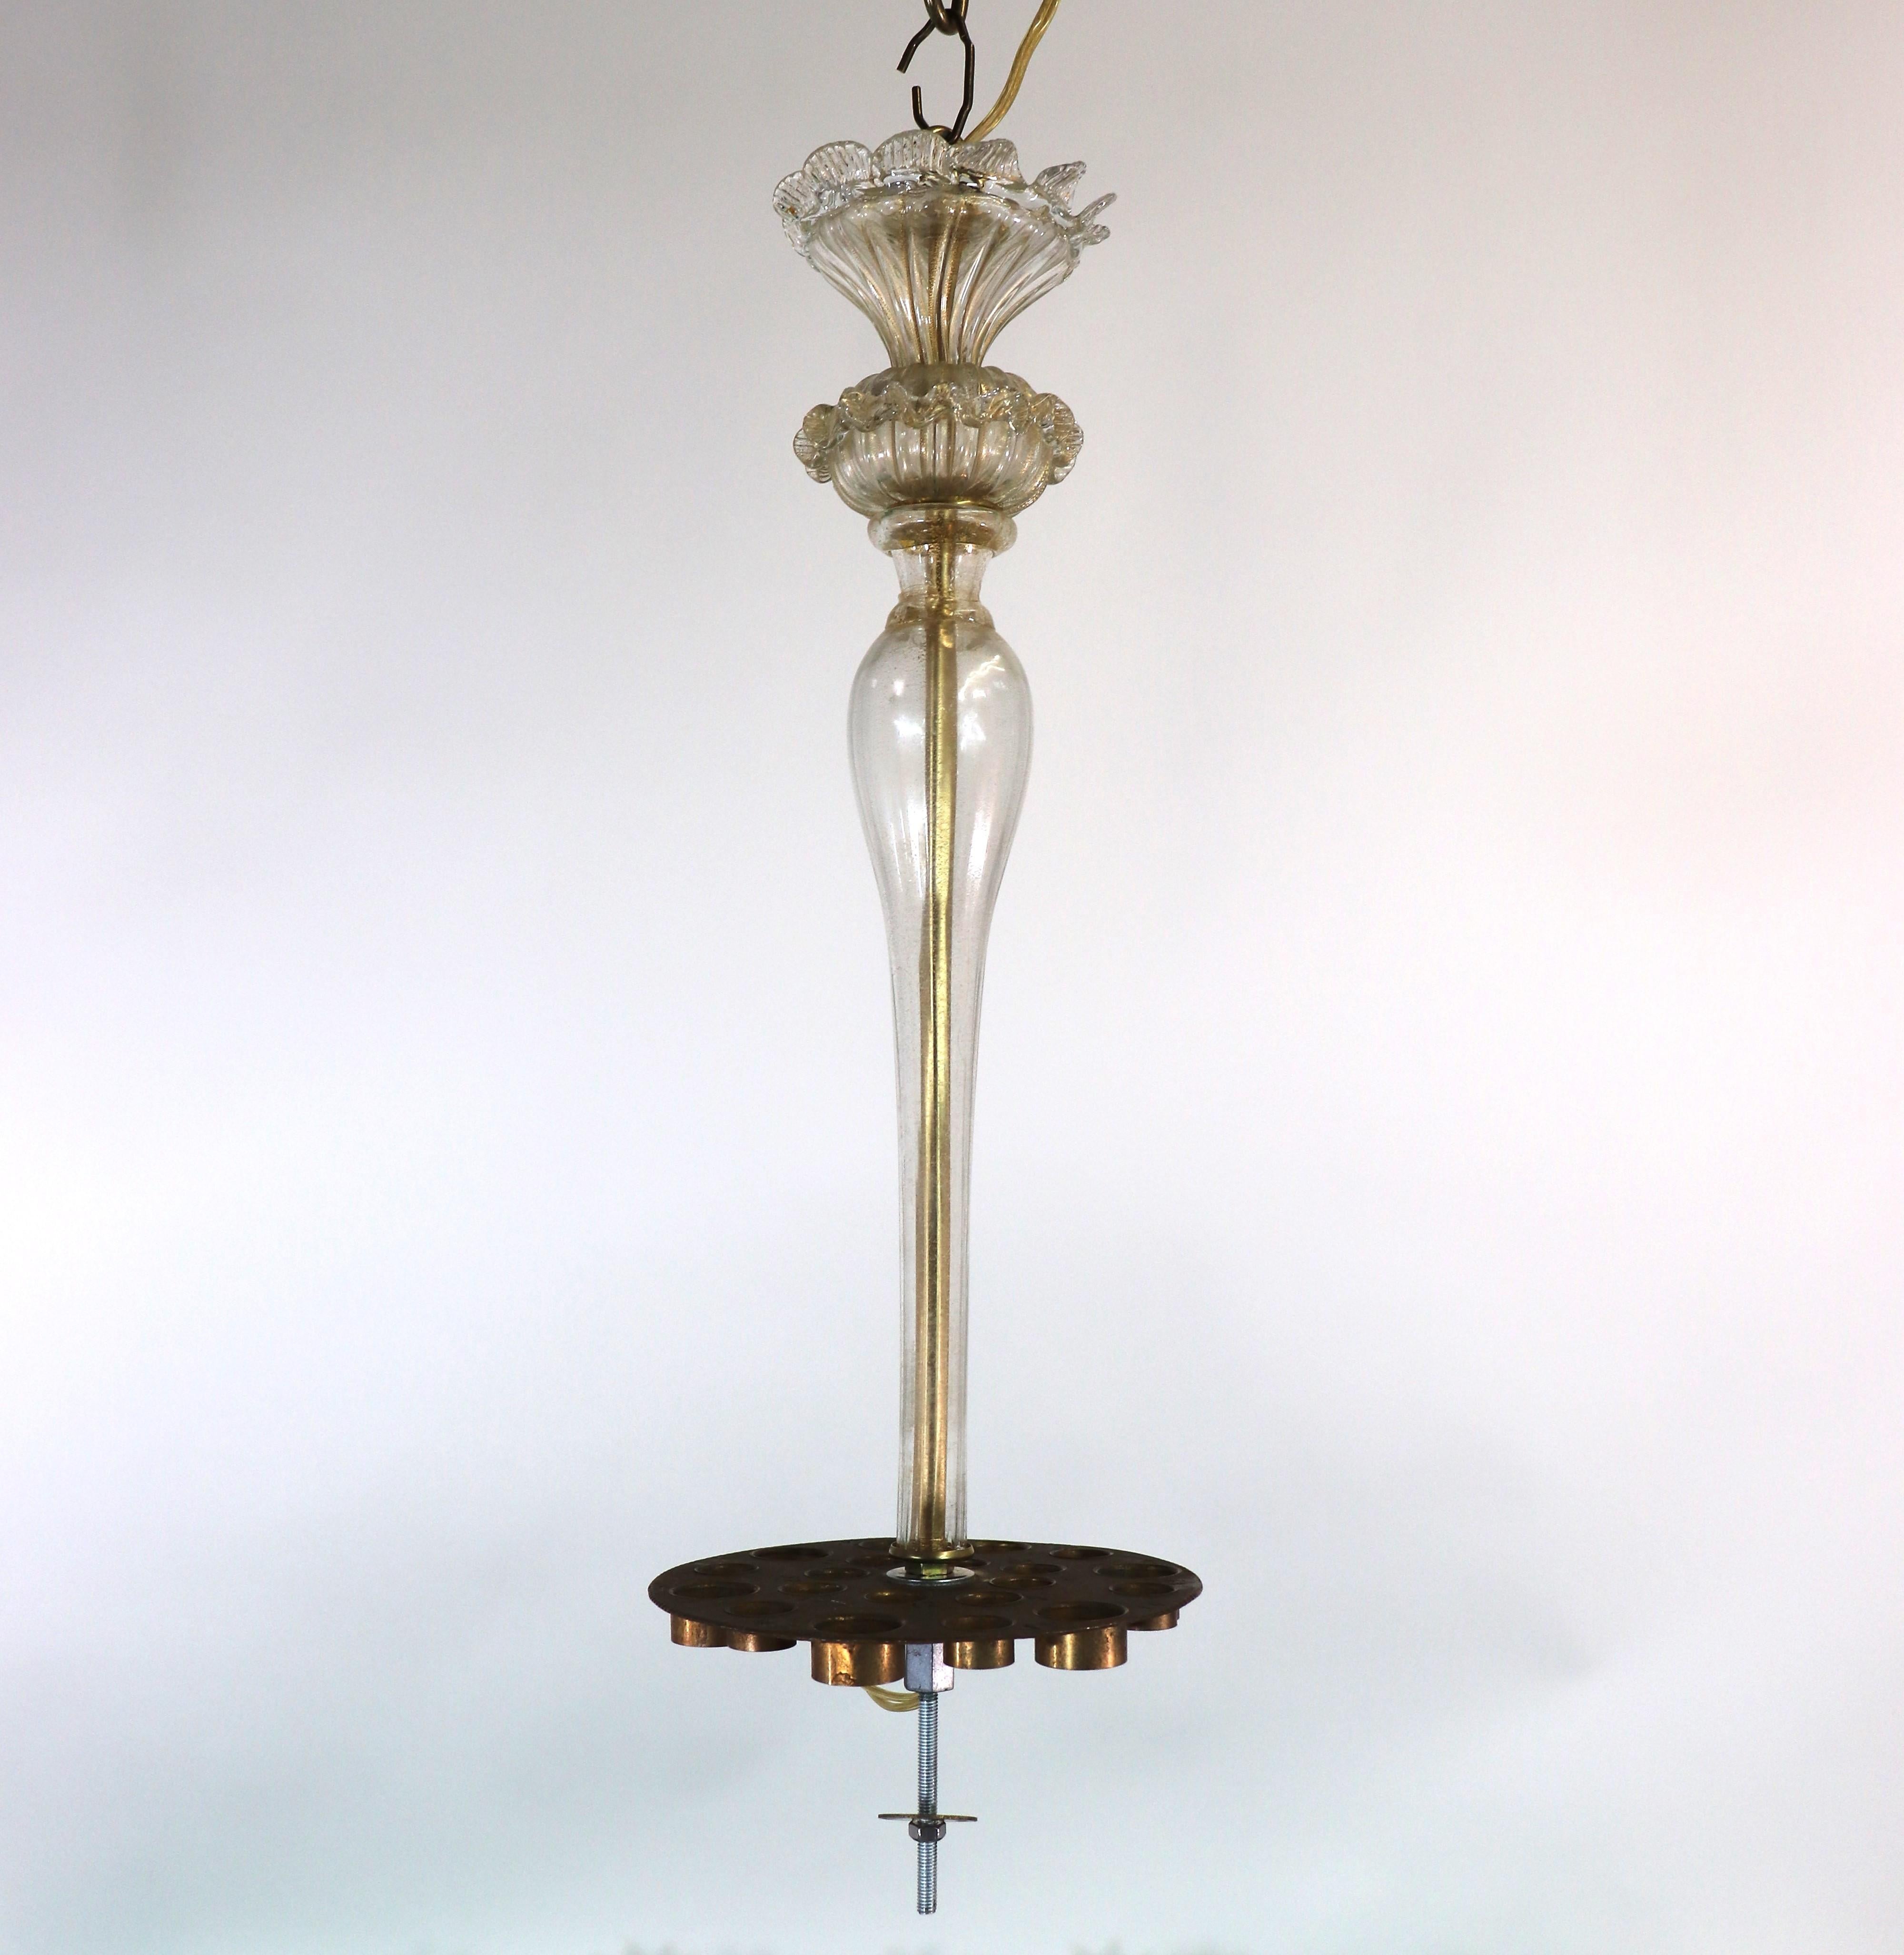  Vintage Baroque Style Gold Infused Cristallo Murano Chandelier For Sale 1